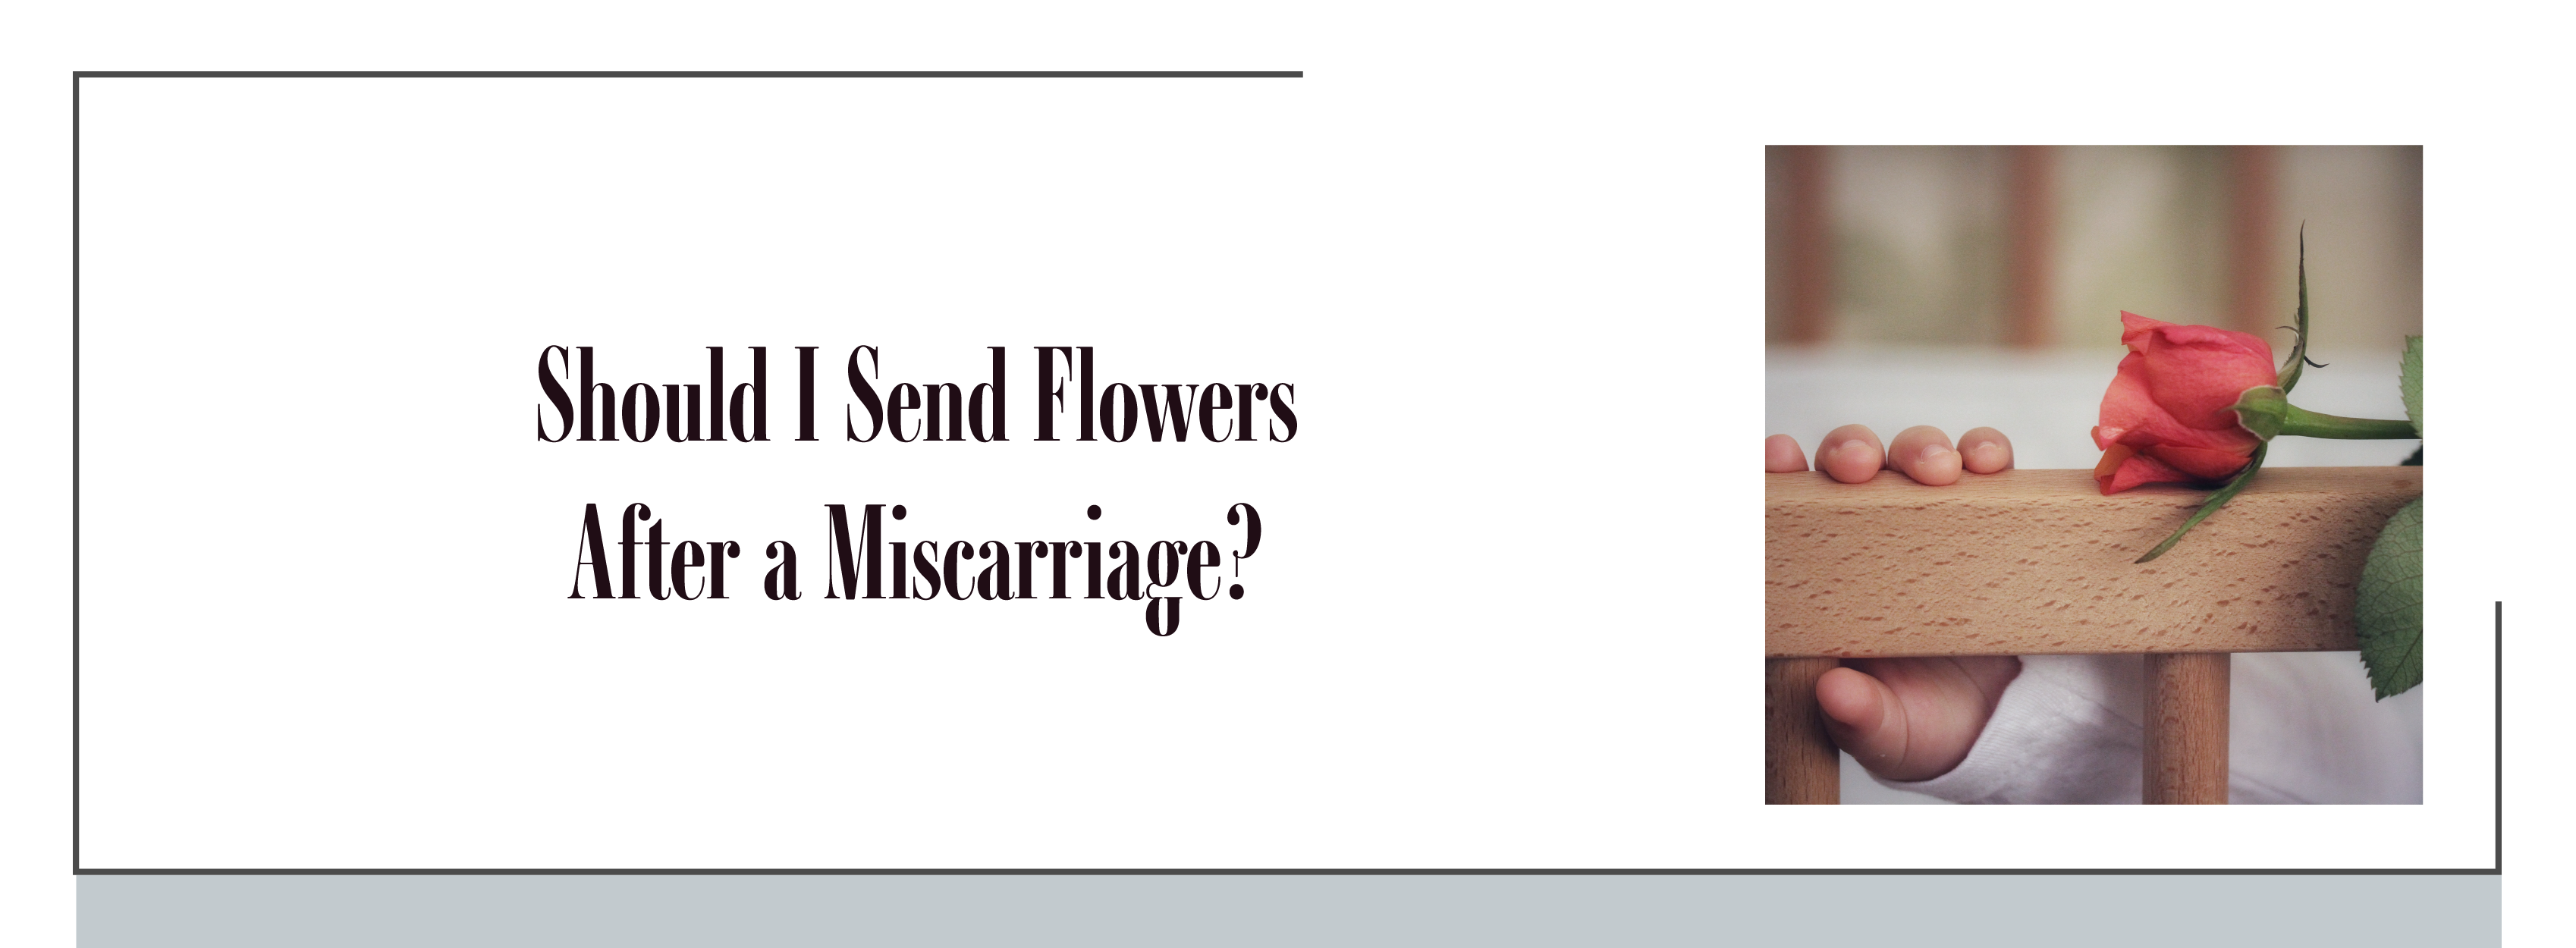 Should I send flowers after a miscarriage